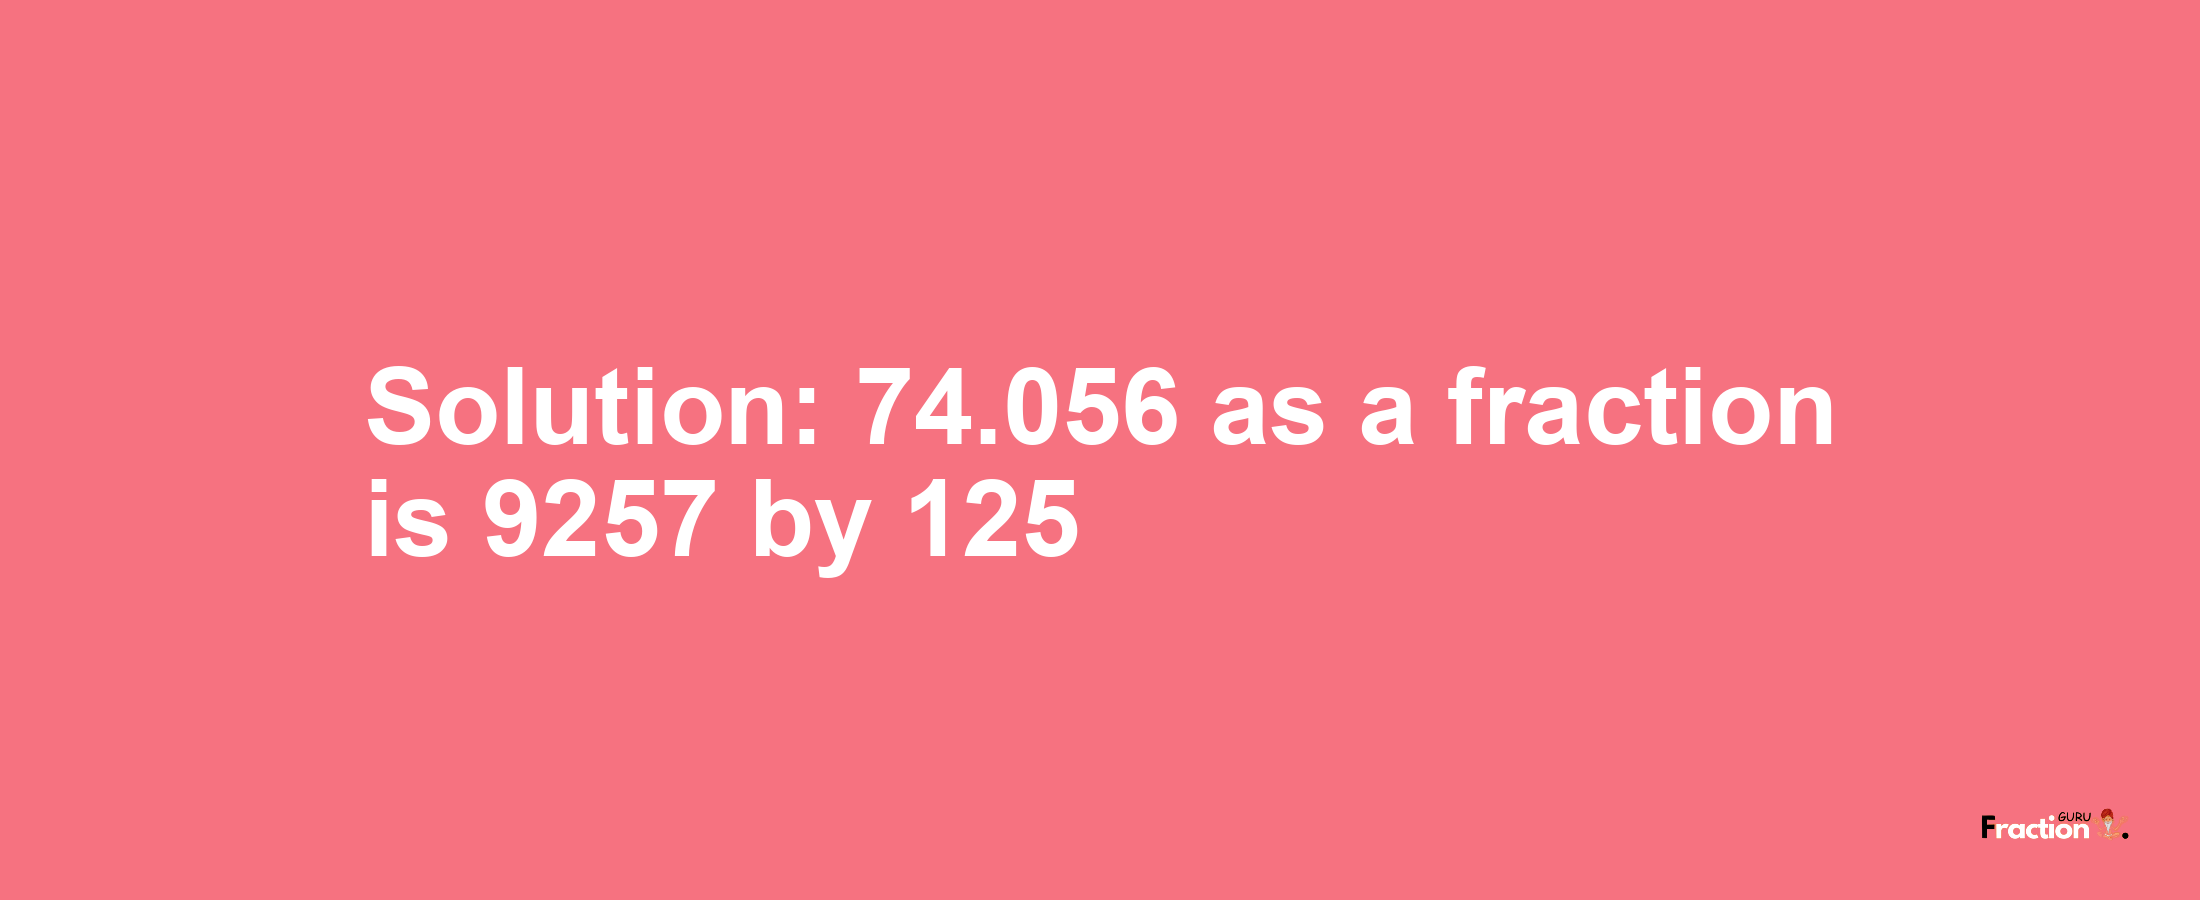 Solution:74.056 as a fraction is 9257/125